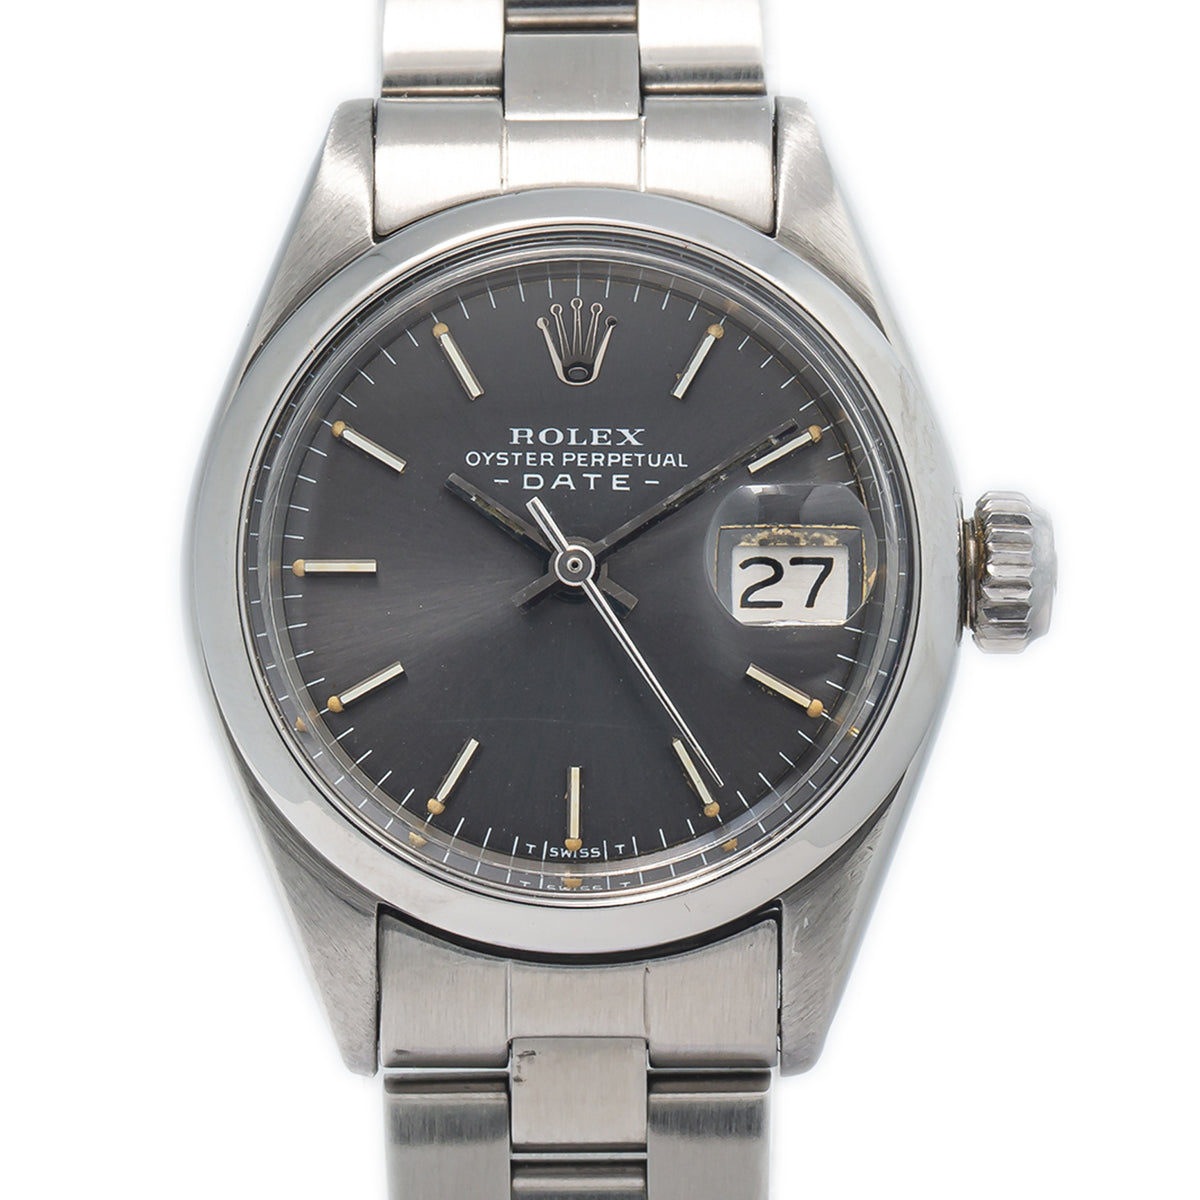 Rolex Oyster Perpetual Date 6916 Stainless Steel Grey Slate Dial Watch 26mm